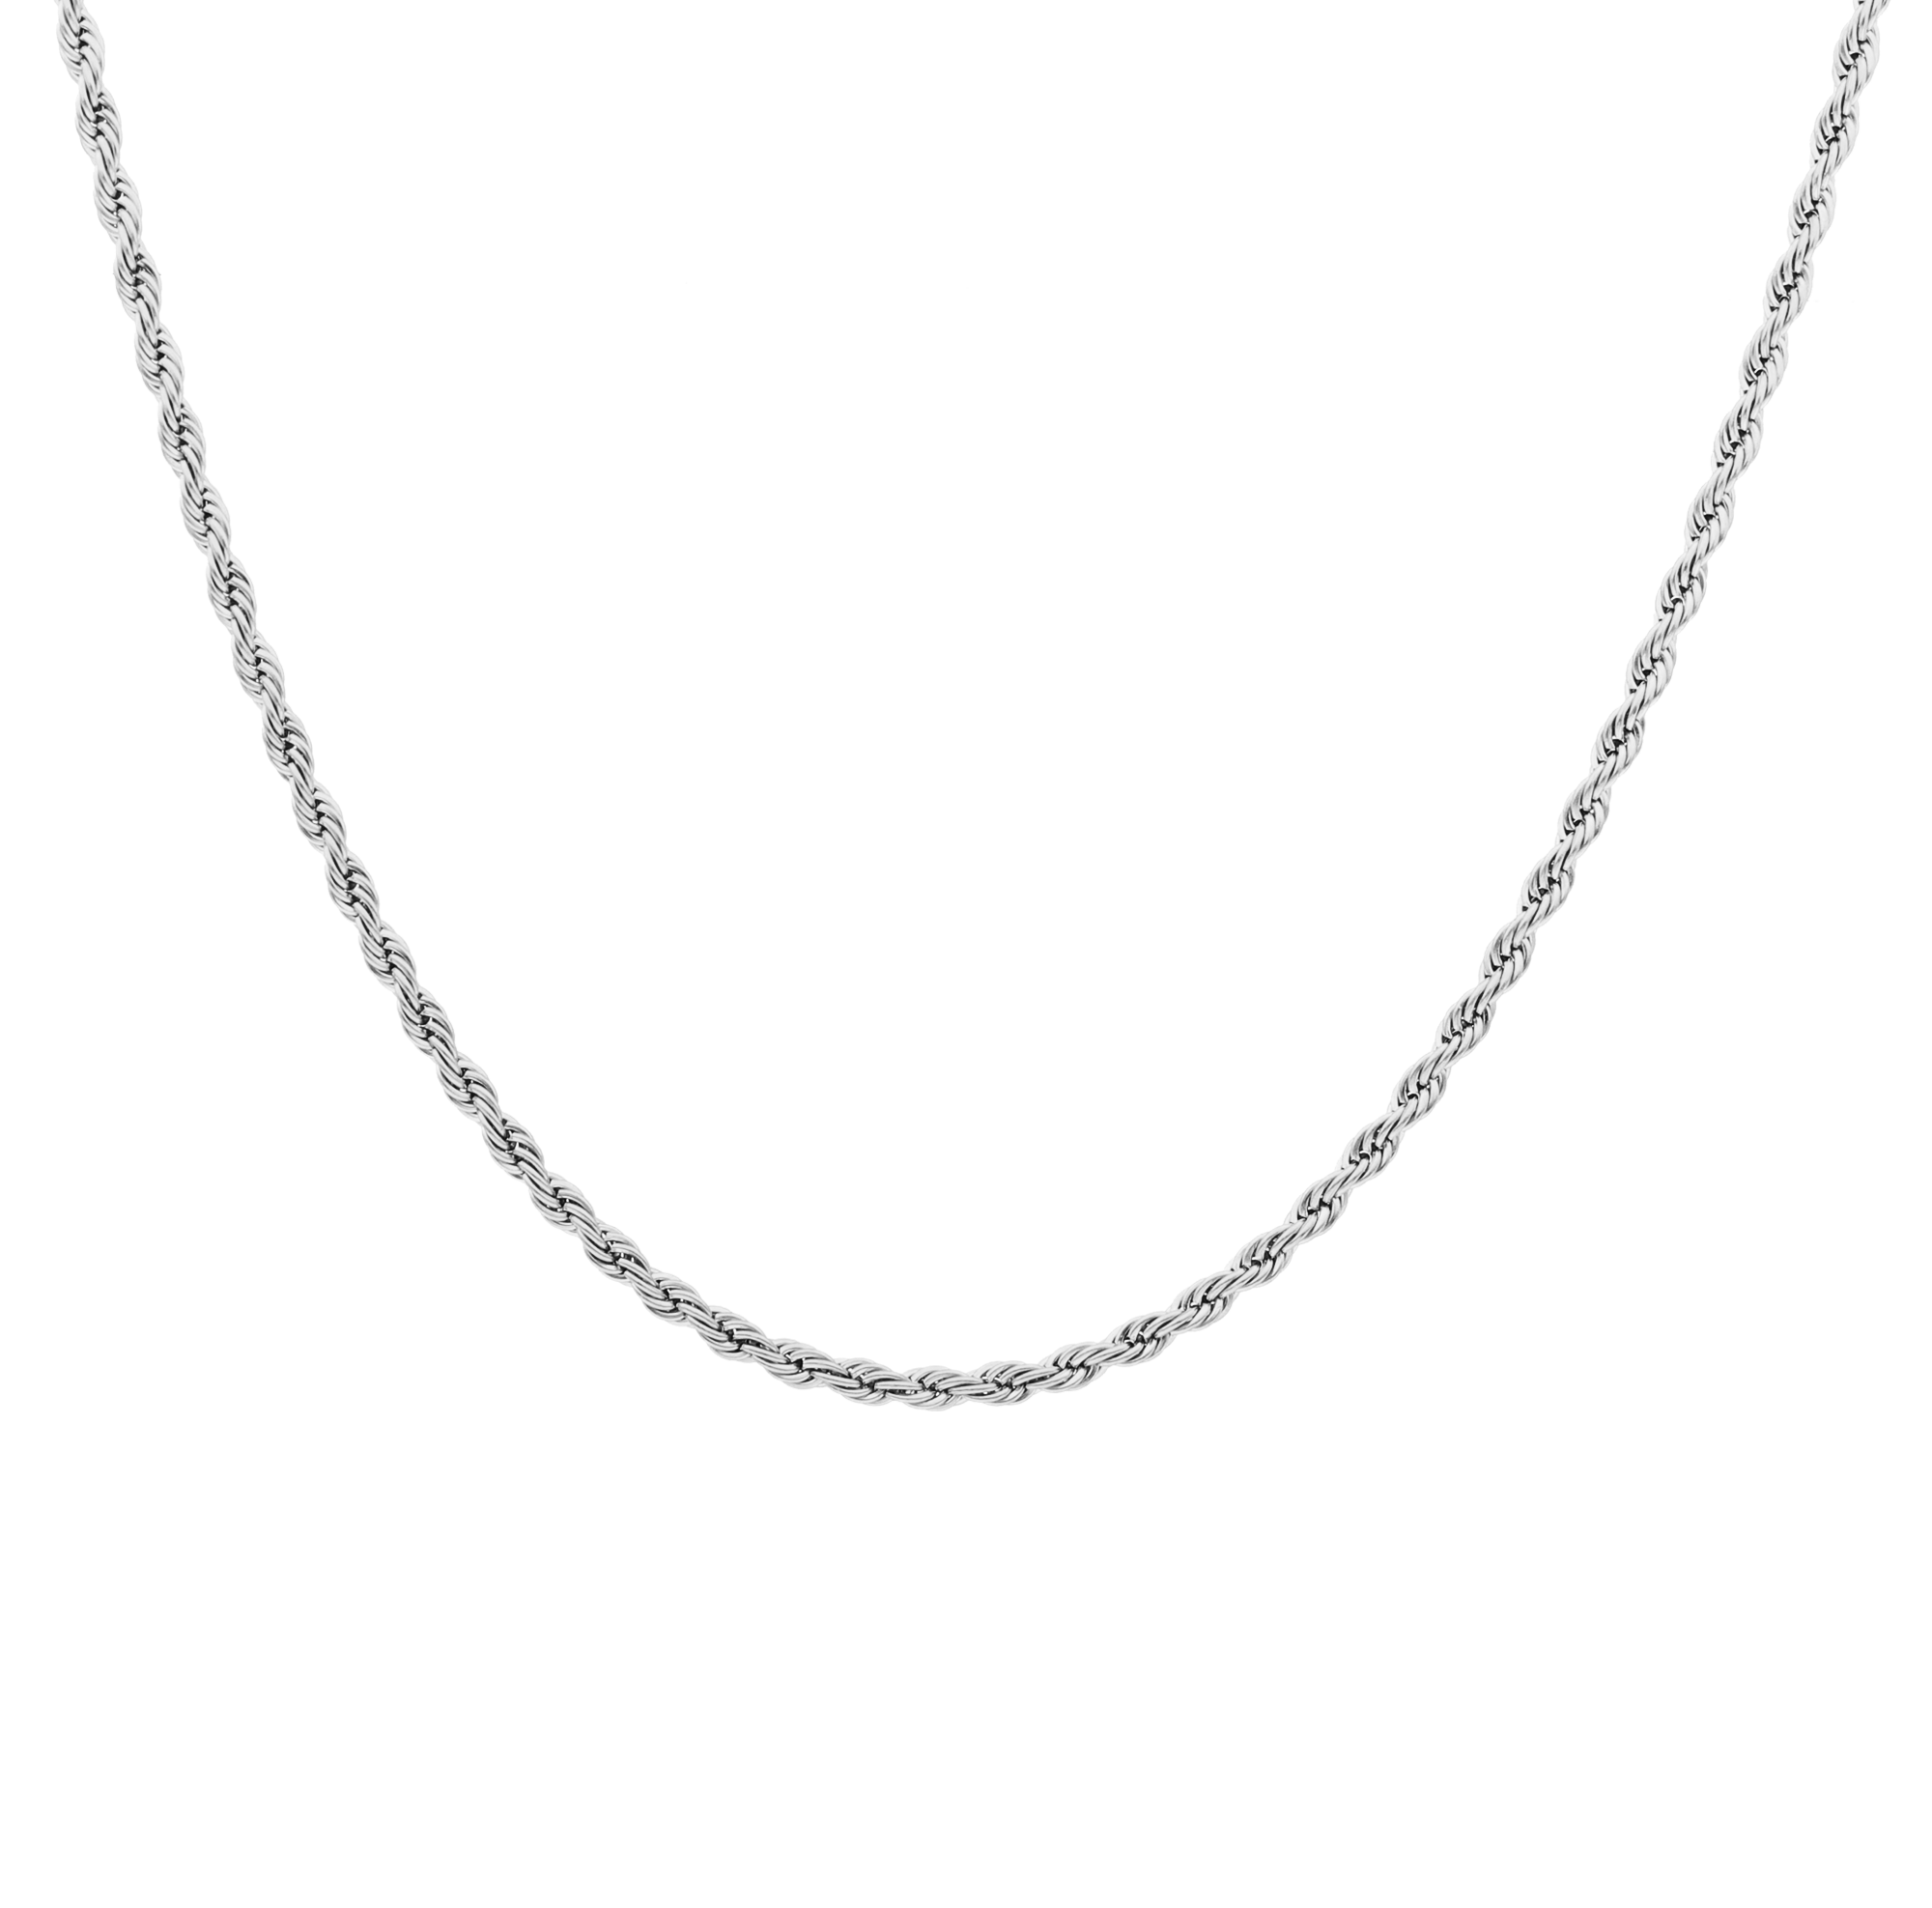 Don men's necklace by Five Jwlry, crafted from a bold 3.5mm French rope twisted chain in silver-colored, water-resistant 316L stainless steel. Available in sizes 45cm, 50cm, 55cm and 65cm. Hypoallergenic with a 2-year warranty.